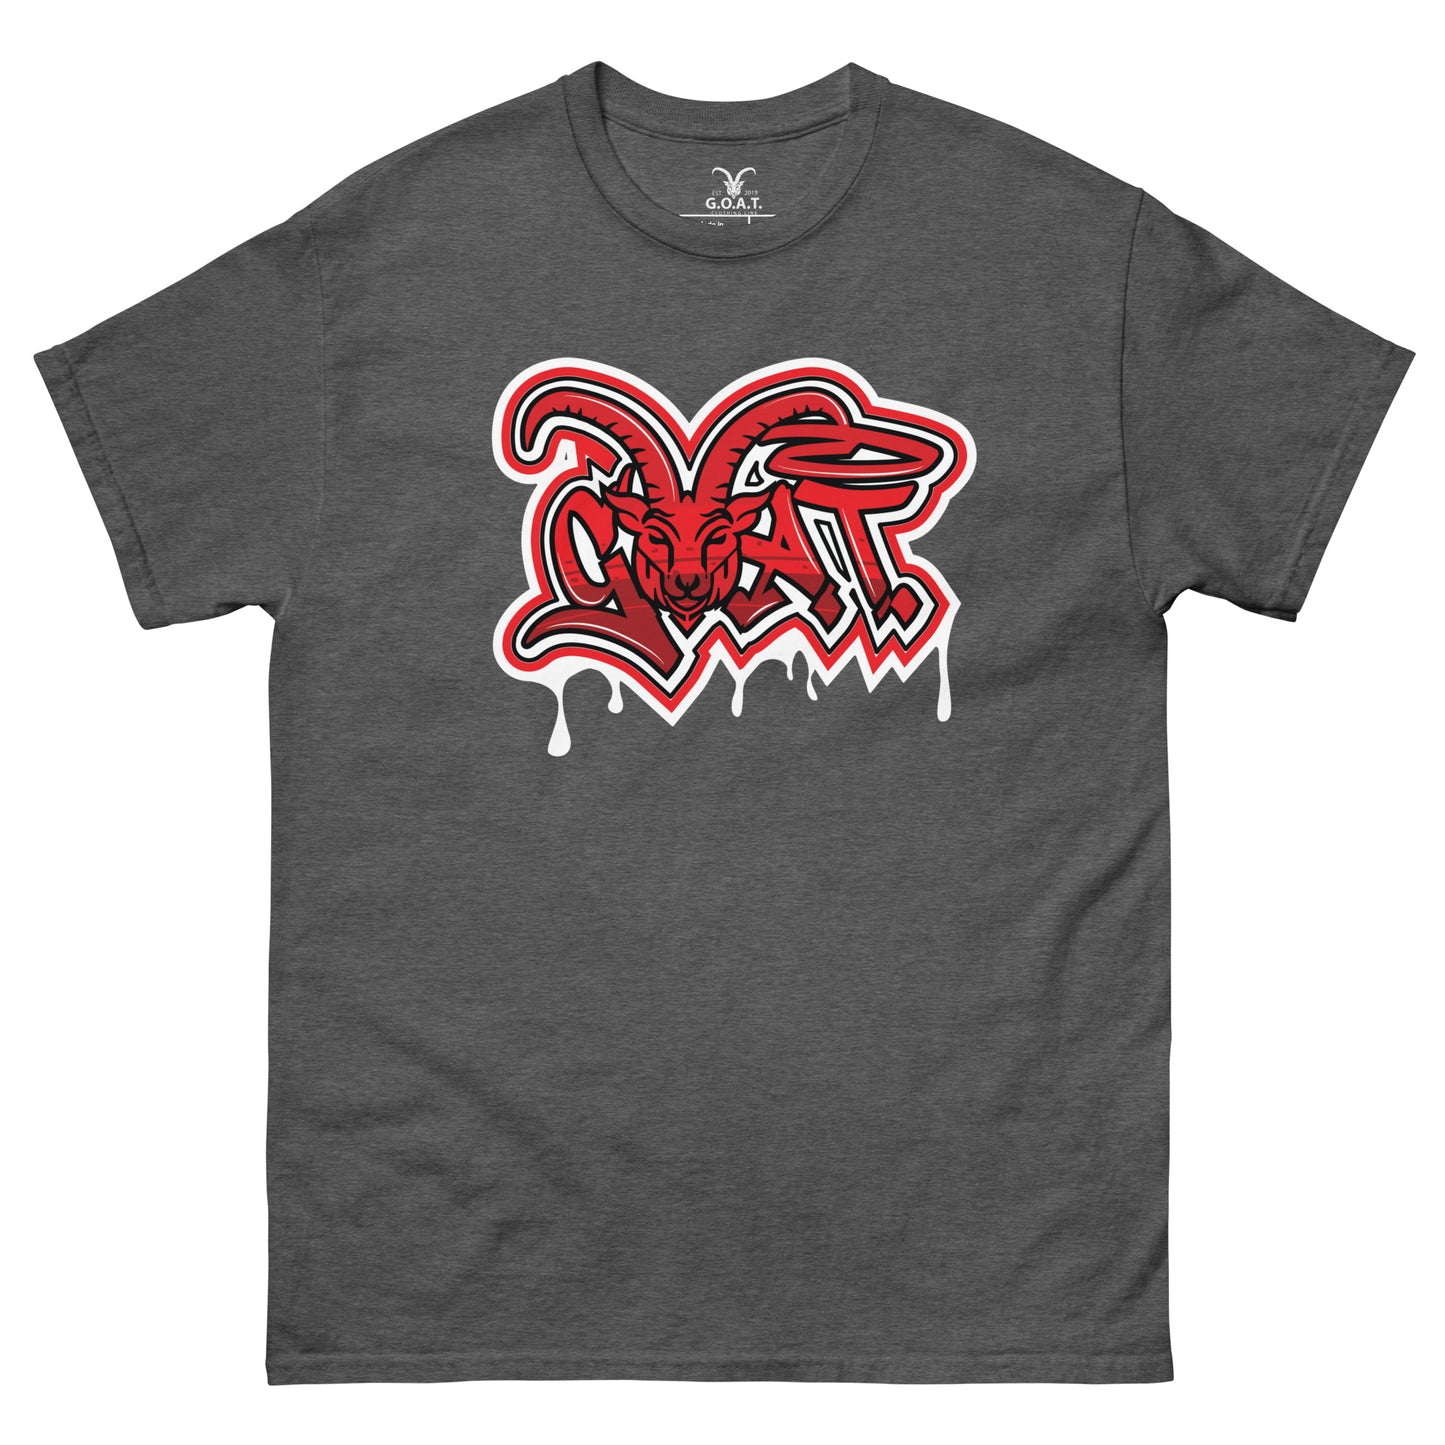 G.O.A.T. Limited Edition Red/White/Black T-Shirt (3 Colors)